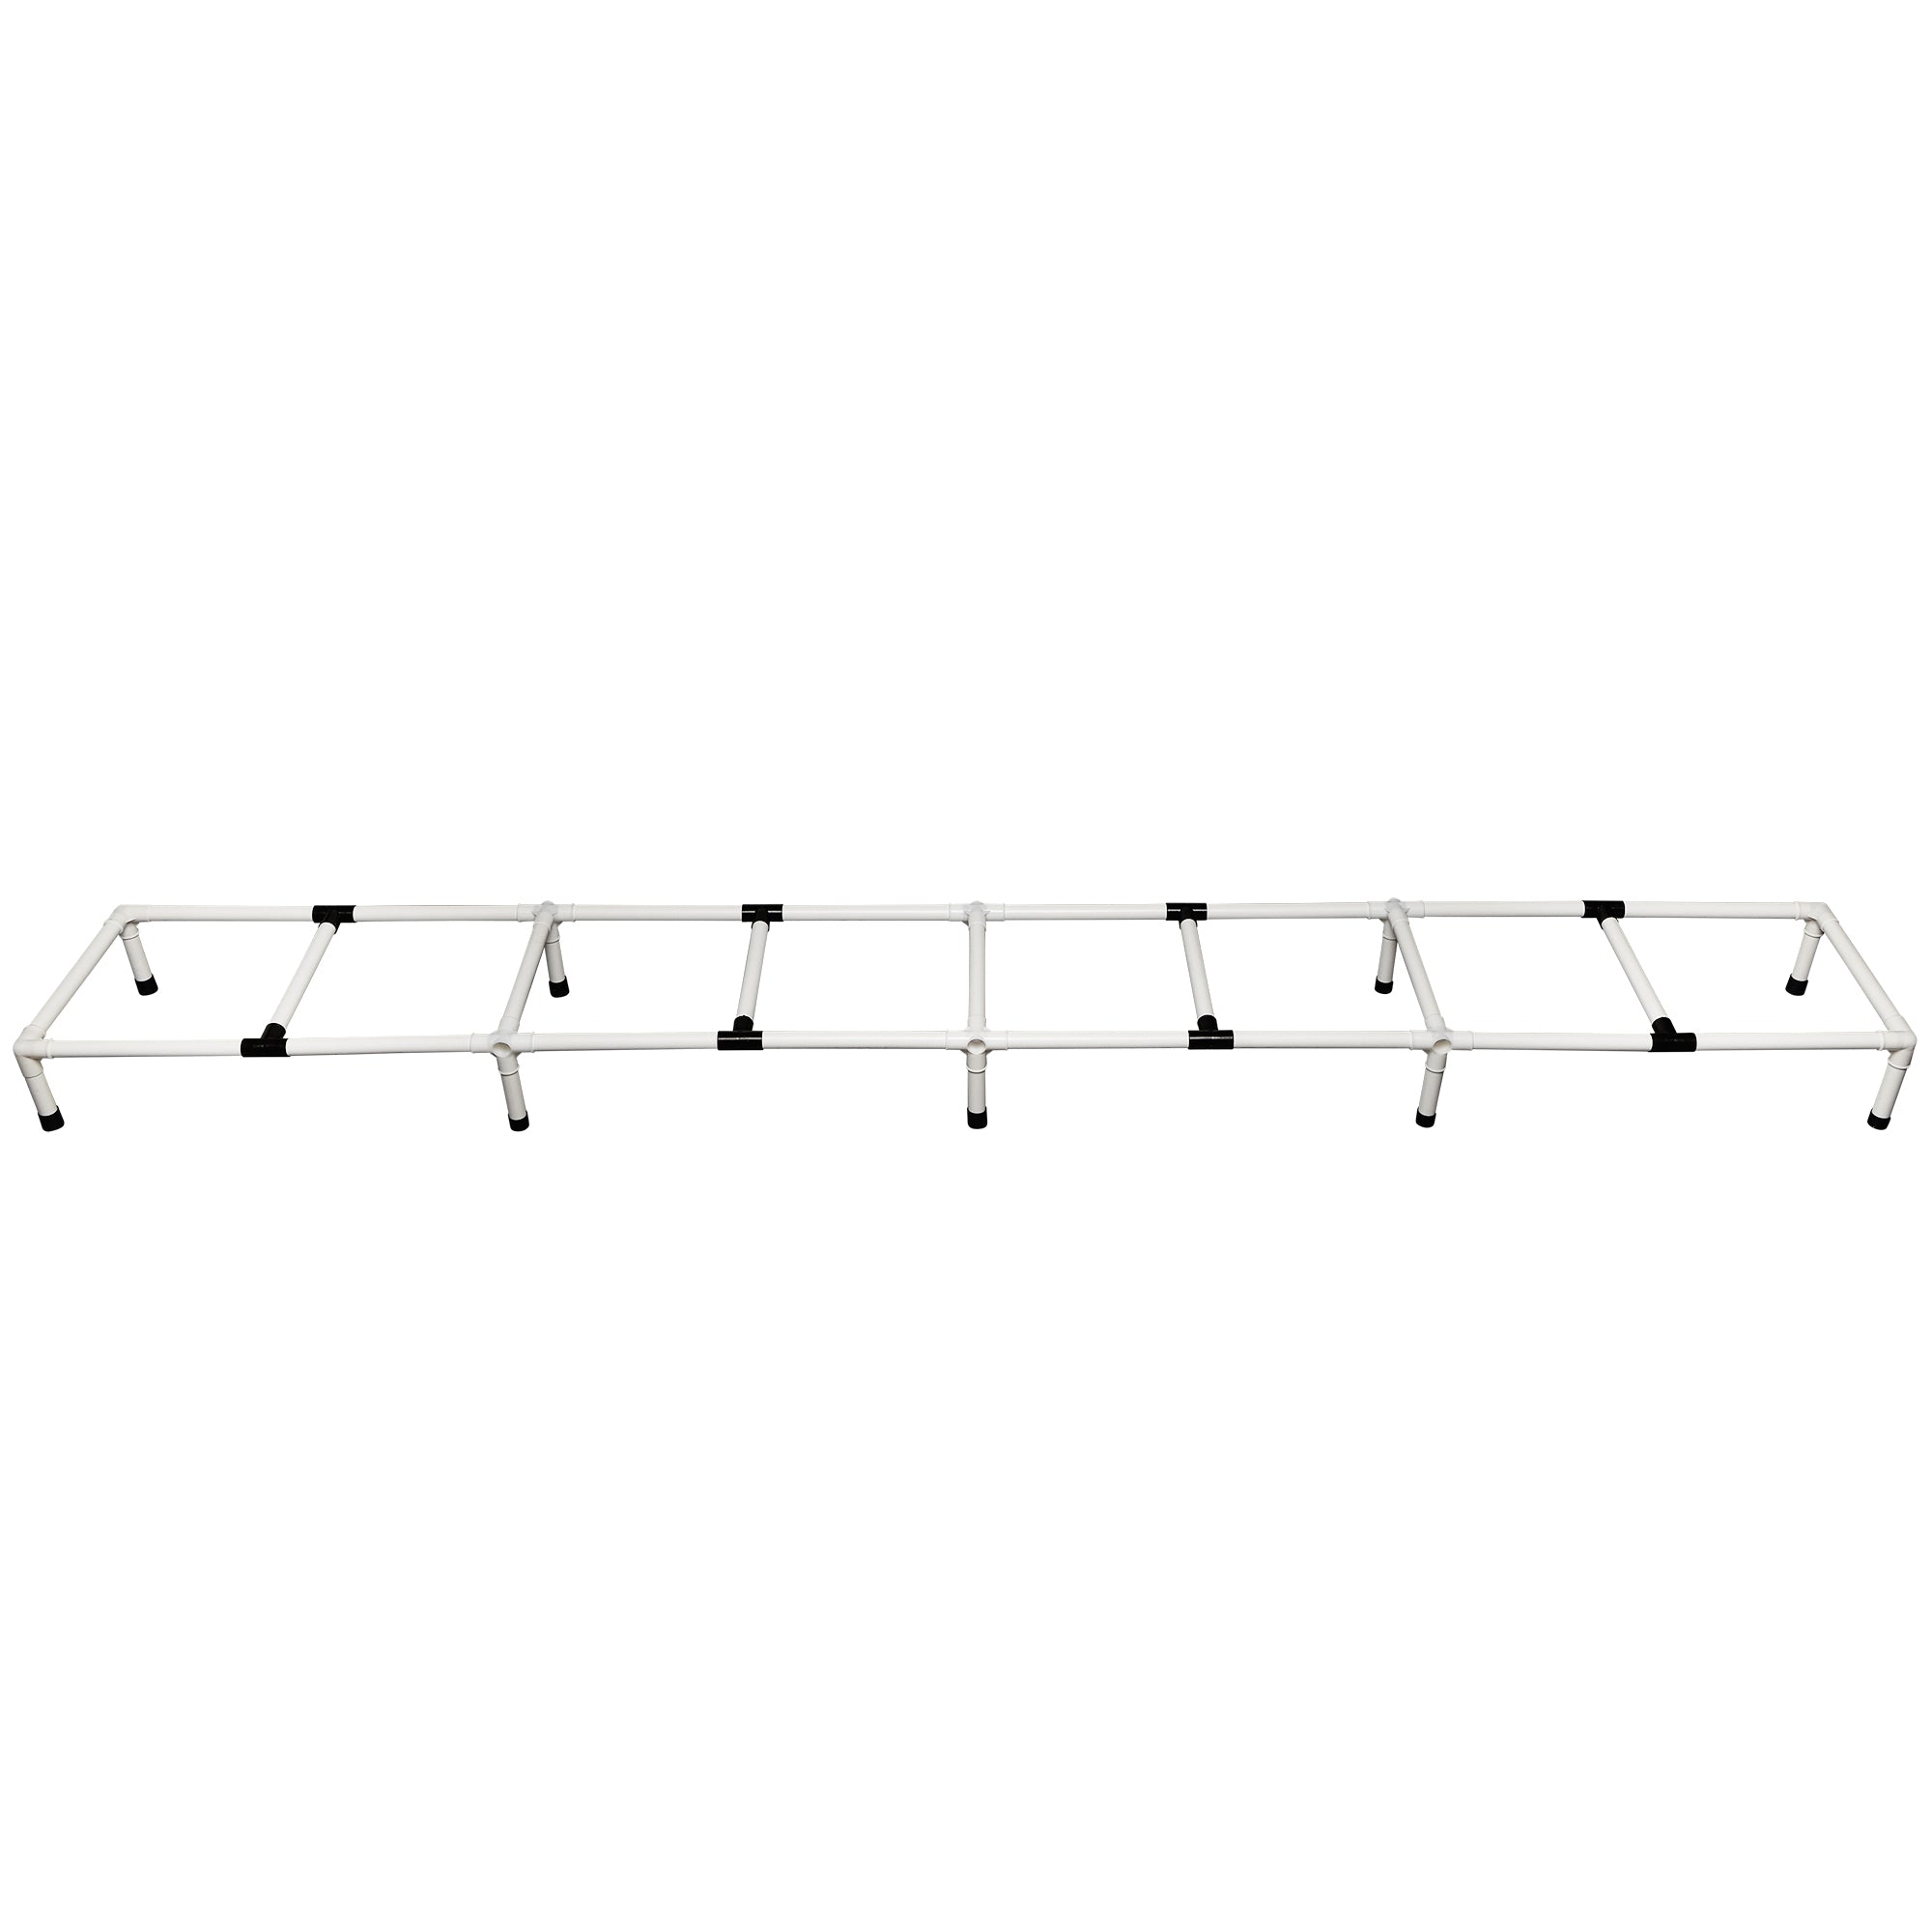 better sporting dogs dog agility training ladder